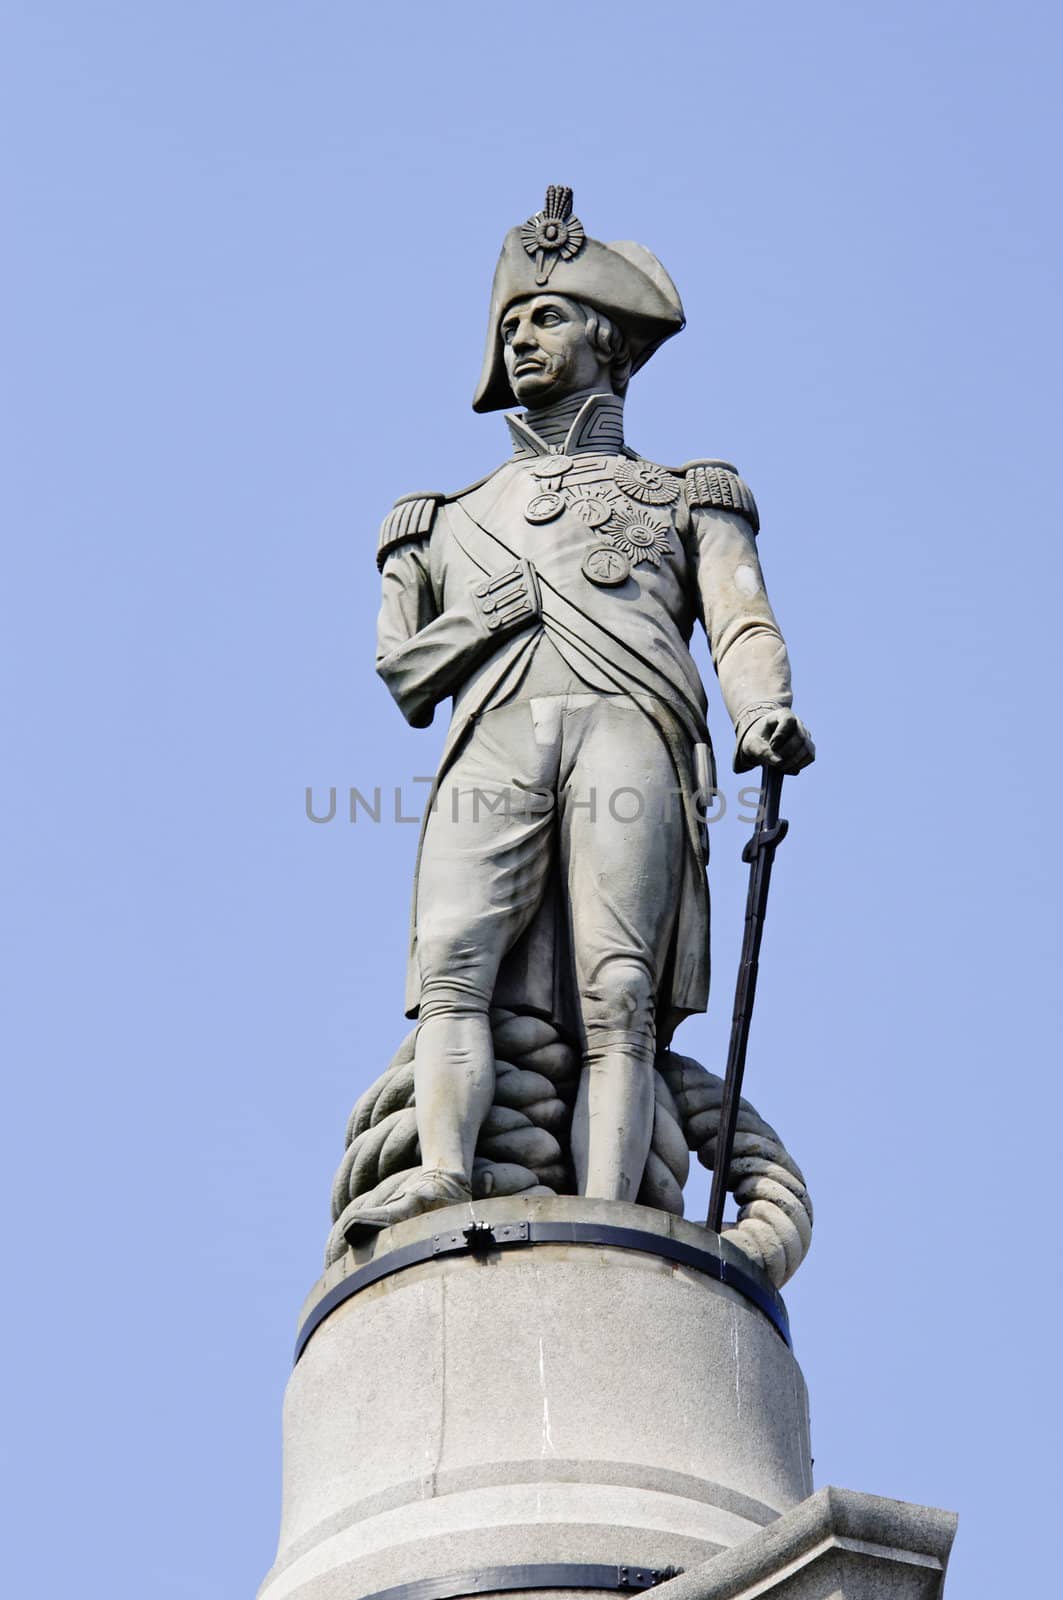 Admiral Nelson statue on top of the Nelson's Column on Trafalgar Square in London, England, UK